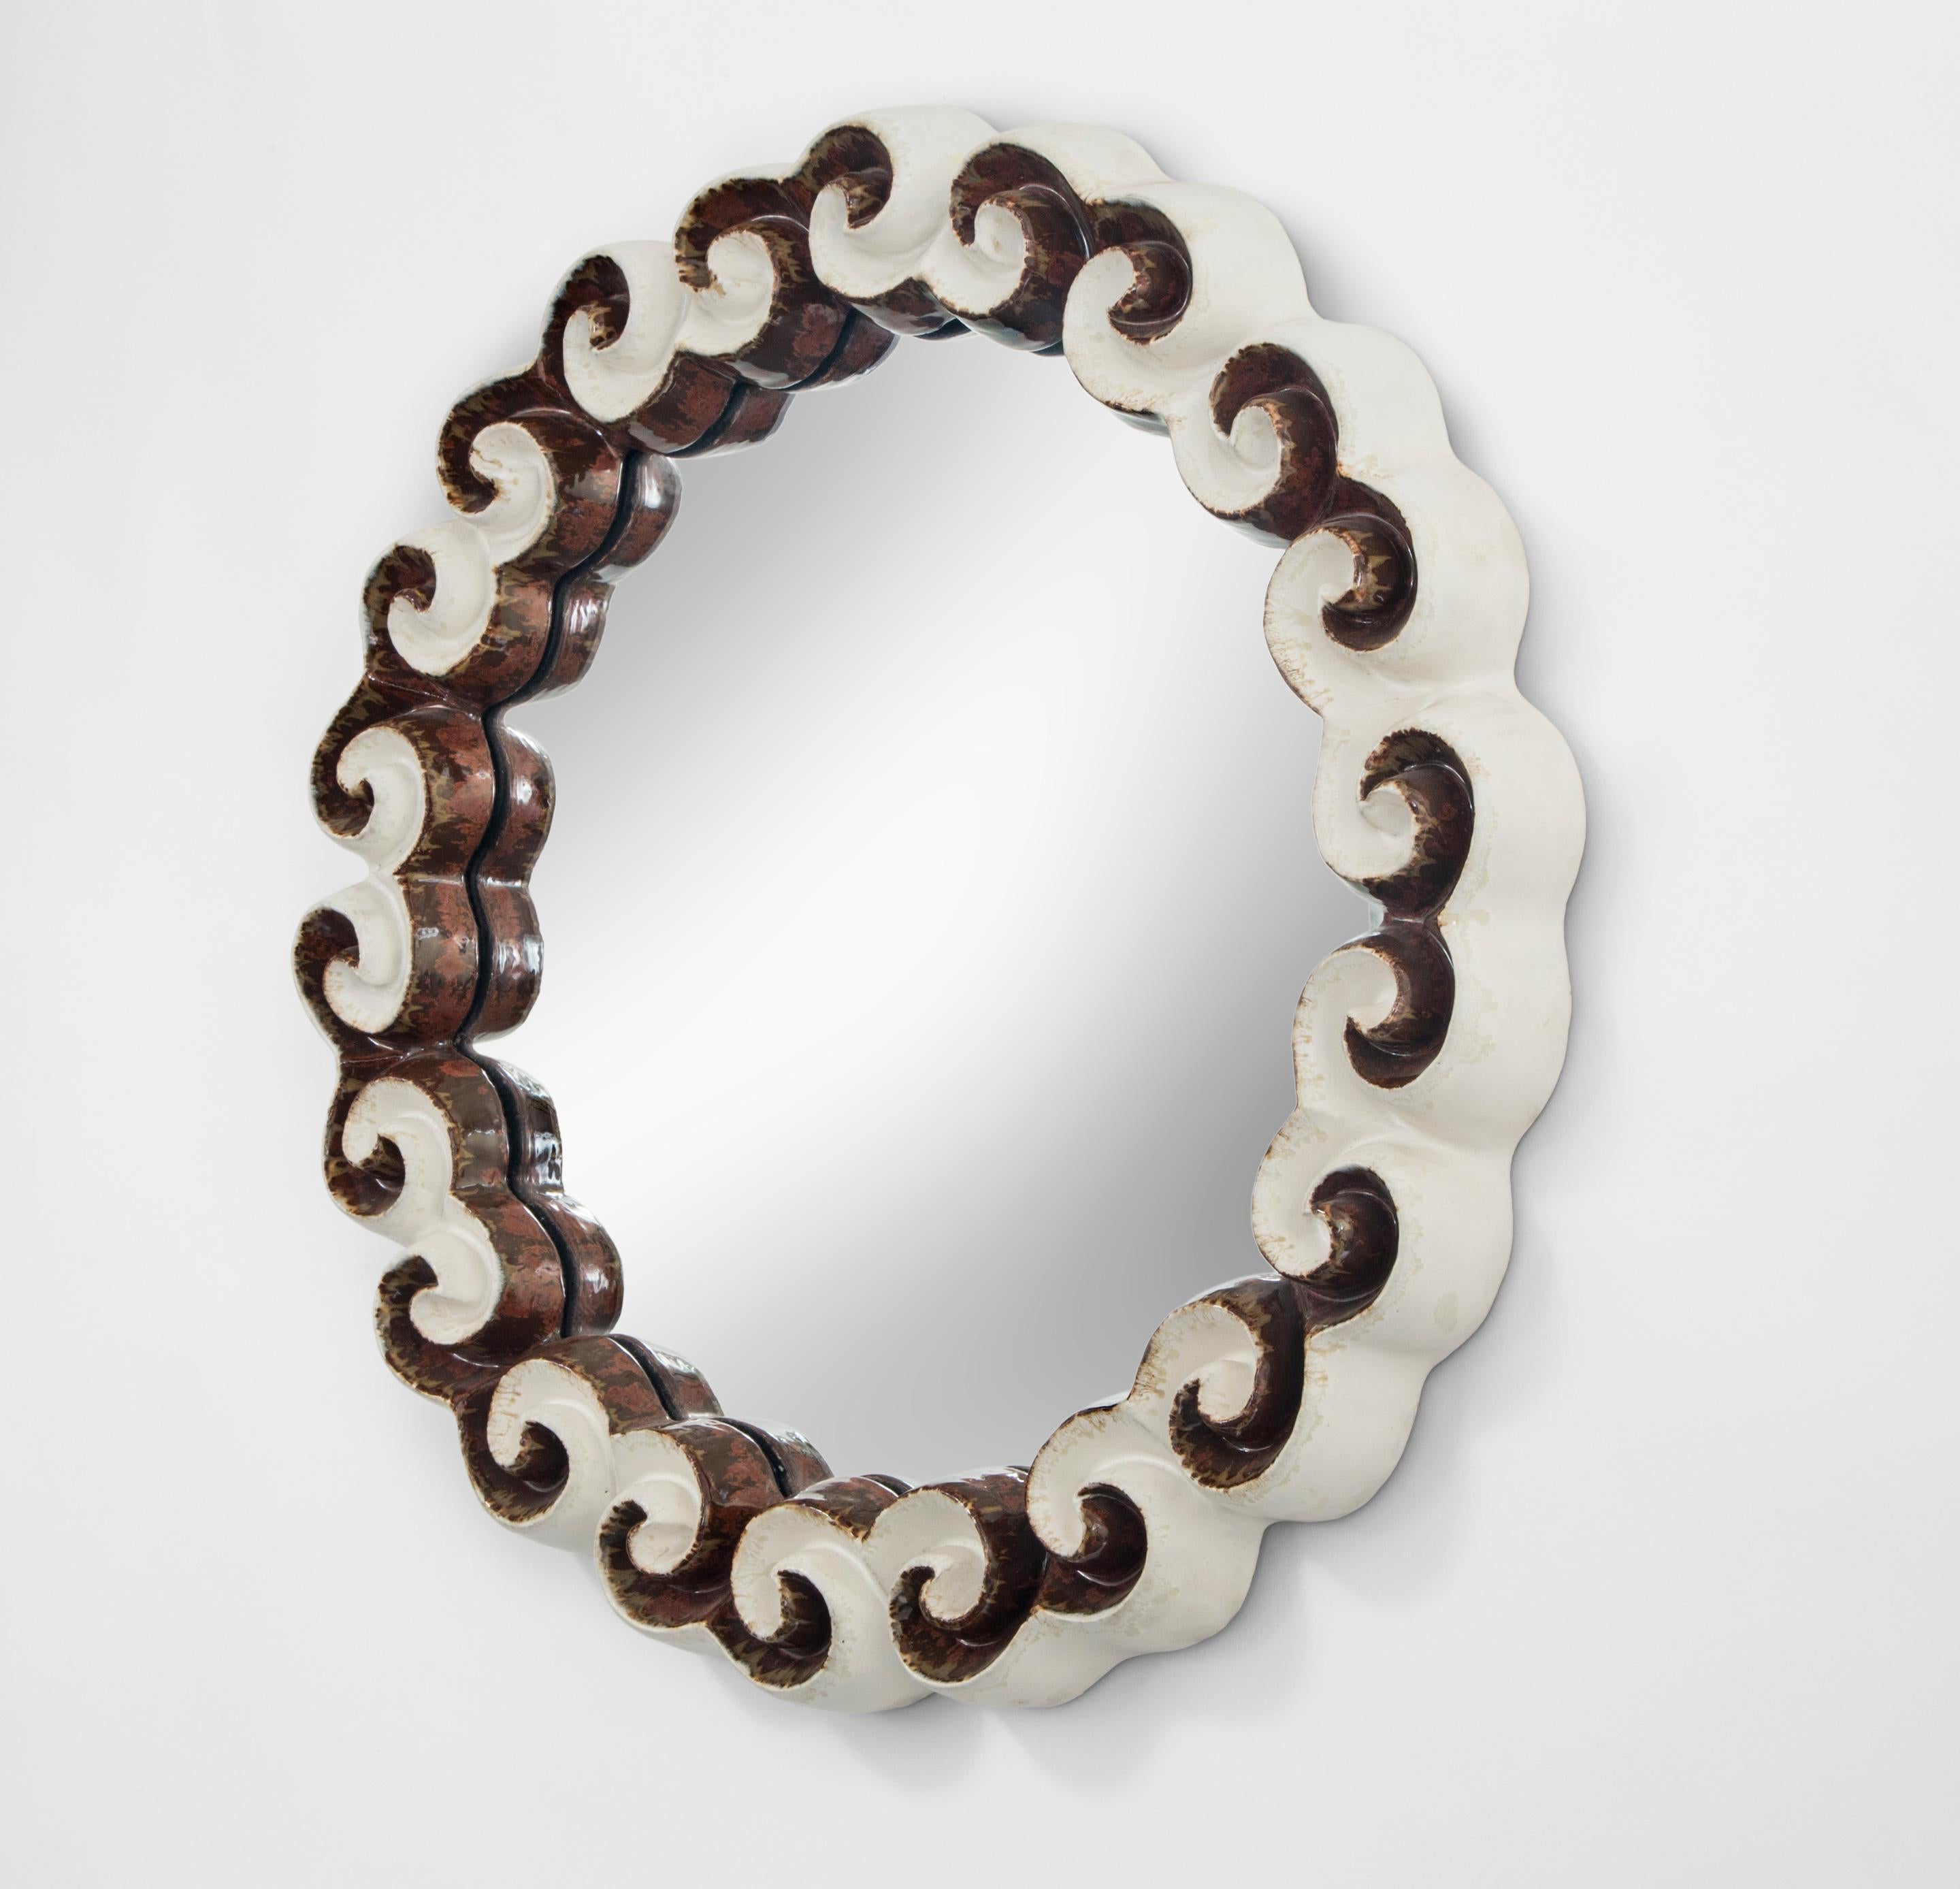 Gail Dooley, circular glazed stoneware cloud mirror
2013
The joyful classical wave scroll reinterpreted by Gail Dooley to invoke swiftly moving clouds in this deftly executed circular mirror.